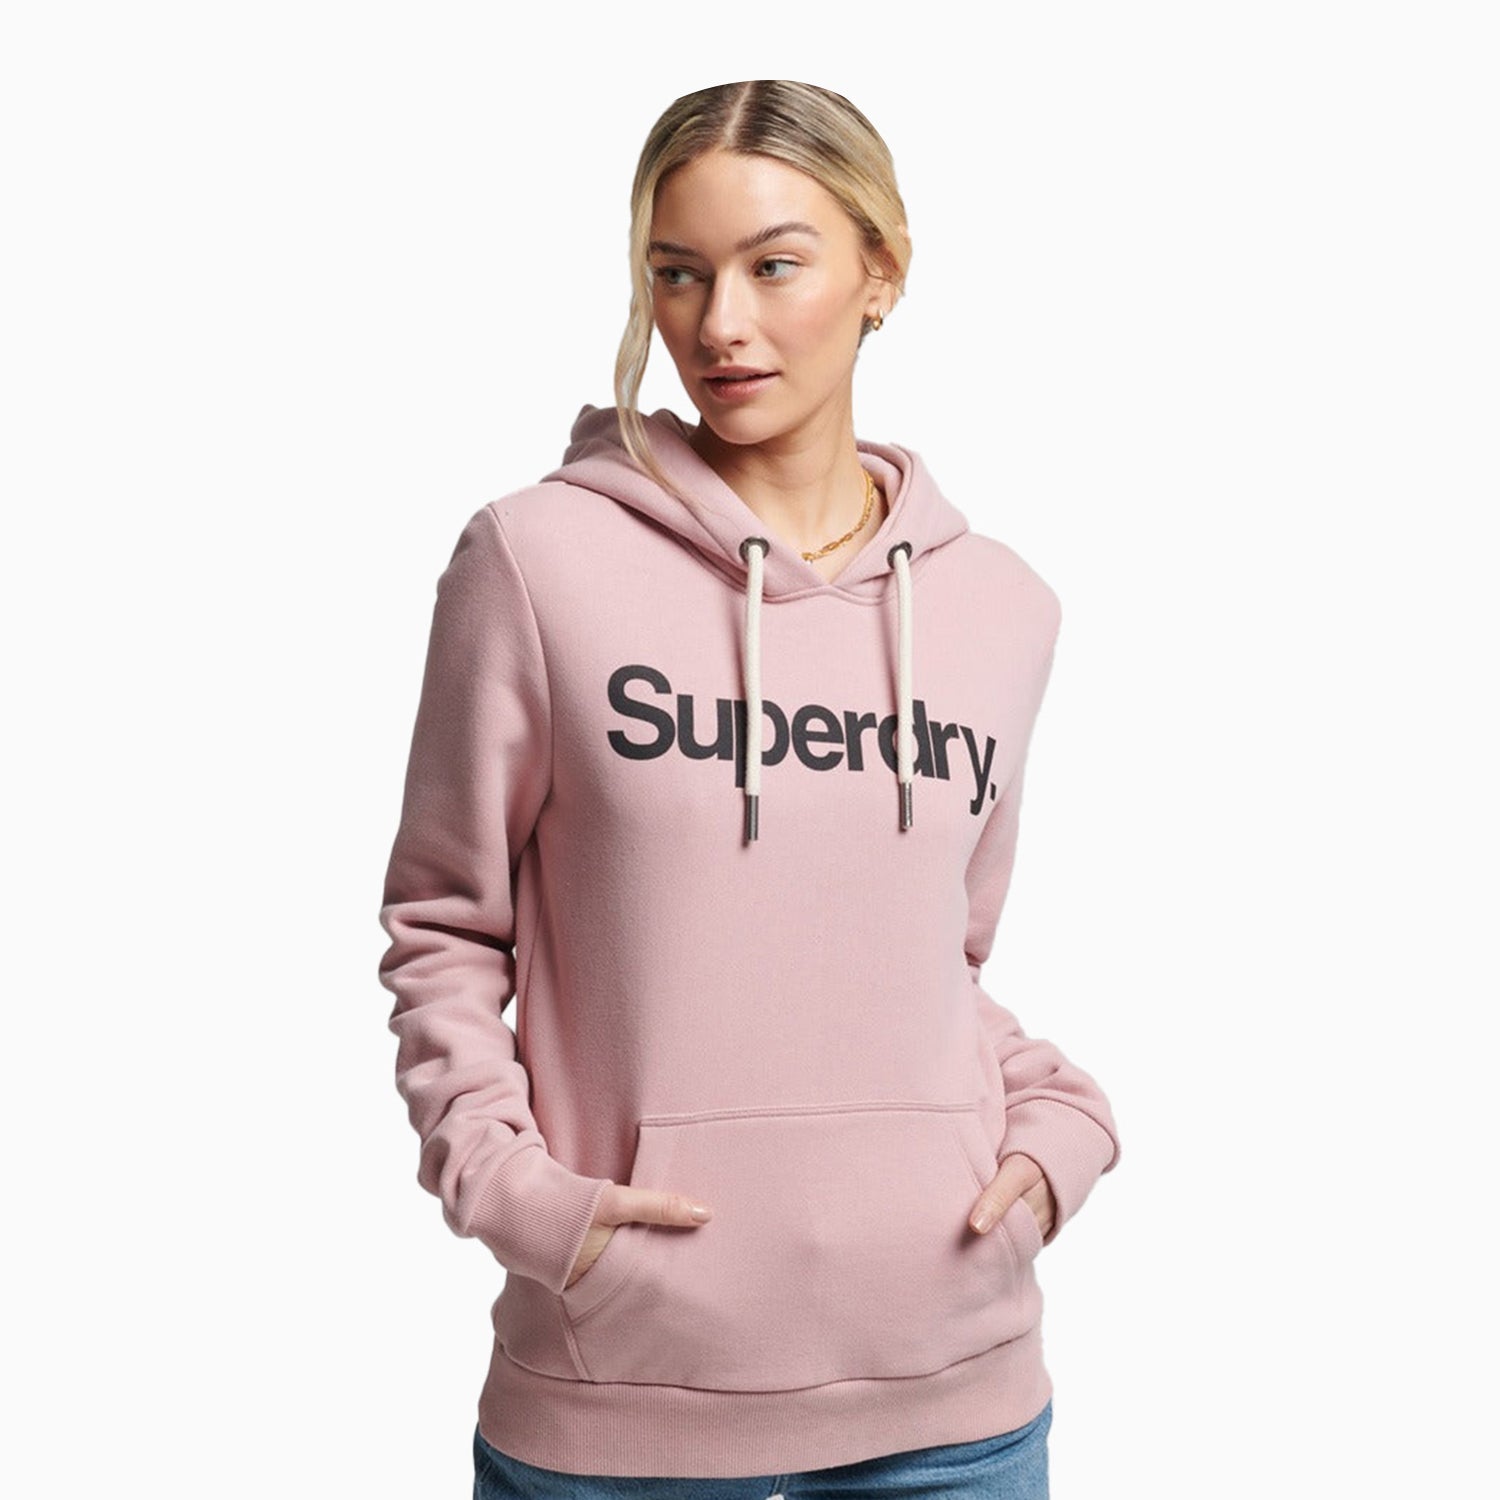 Superdry Women's Core Logo Hoodie - Color: Soft Pink - Tops and Bottoms USA -